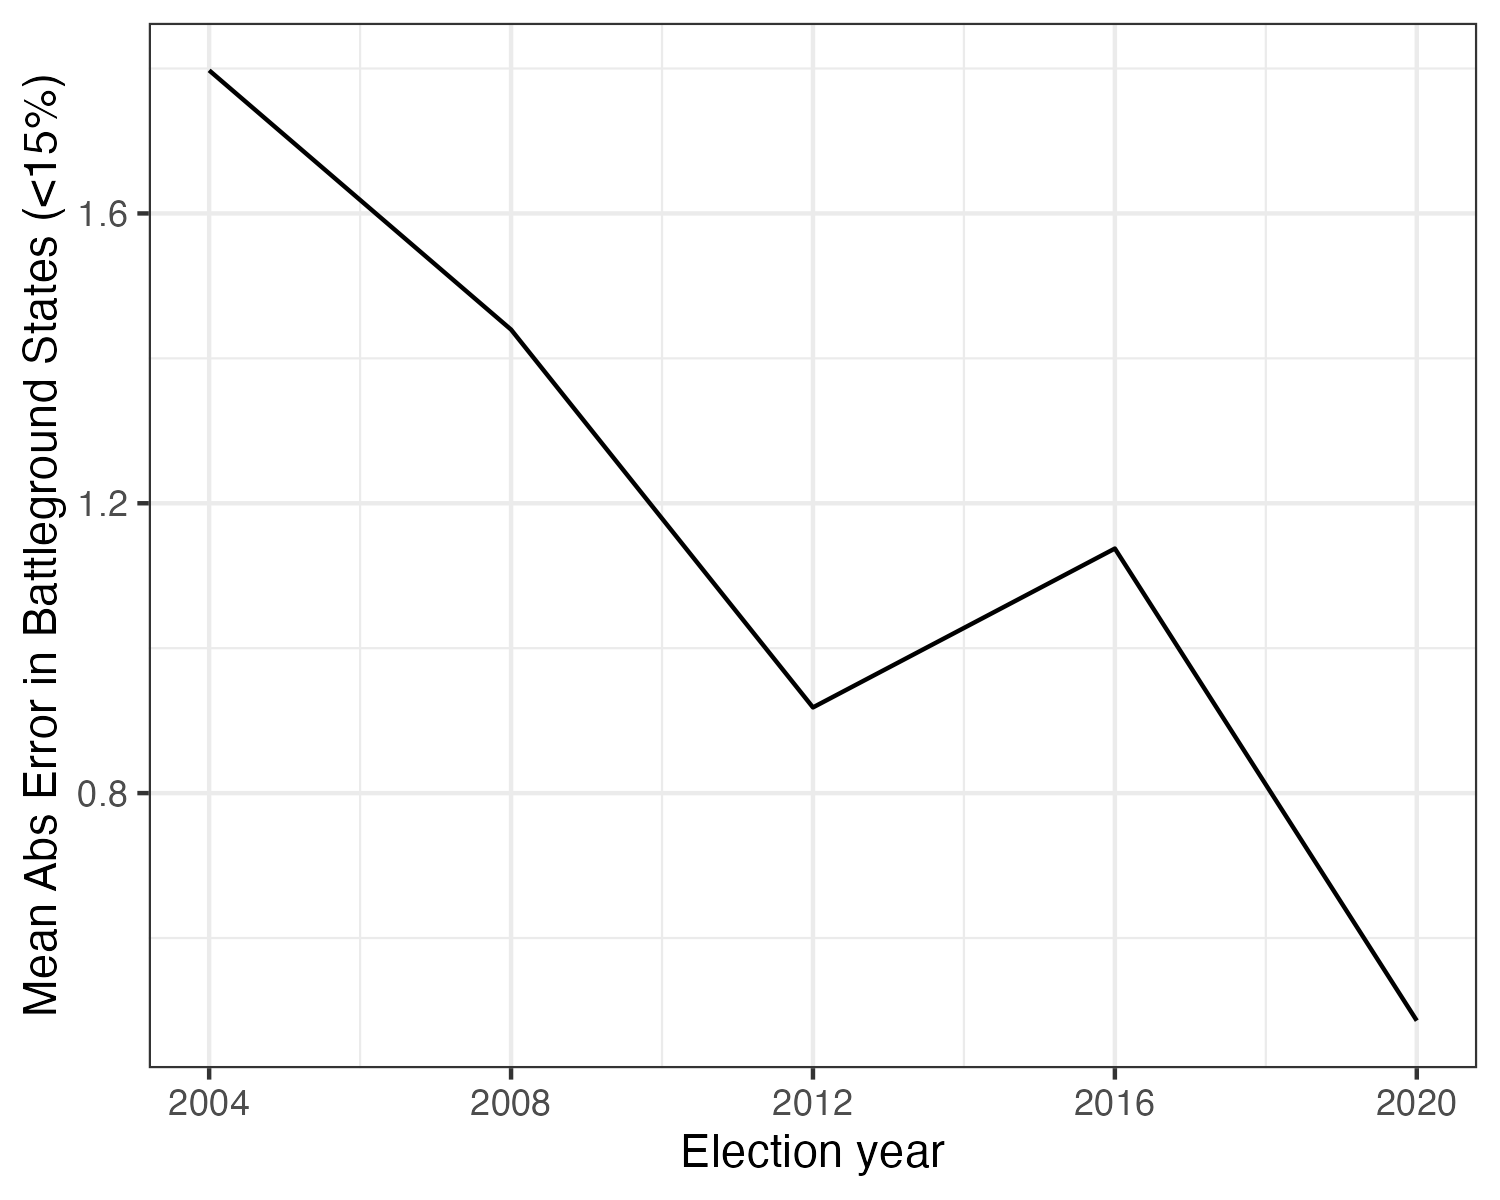 Backtested forecasts improve in accuracy over time, and 2020 was far easier to predict than past elections.